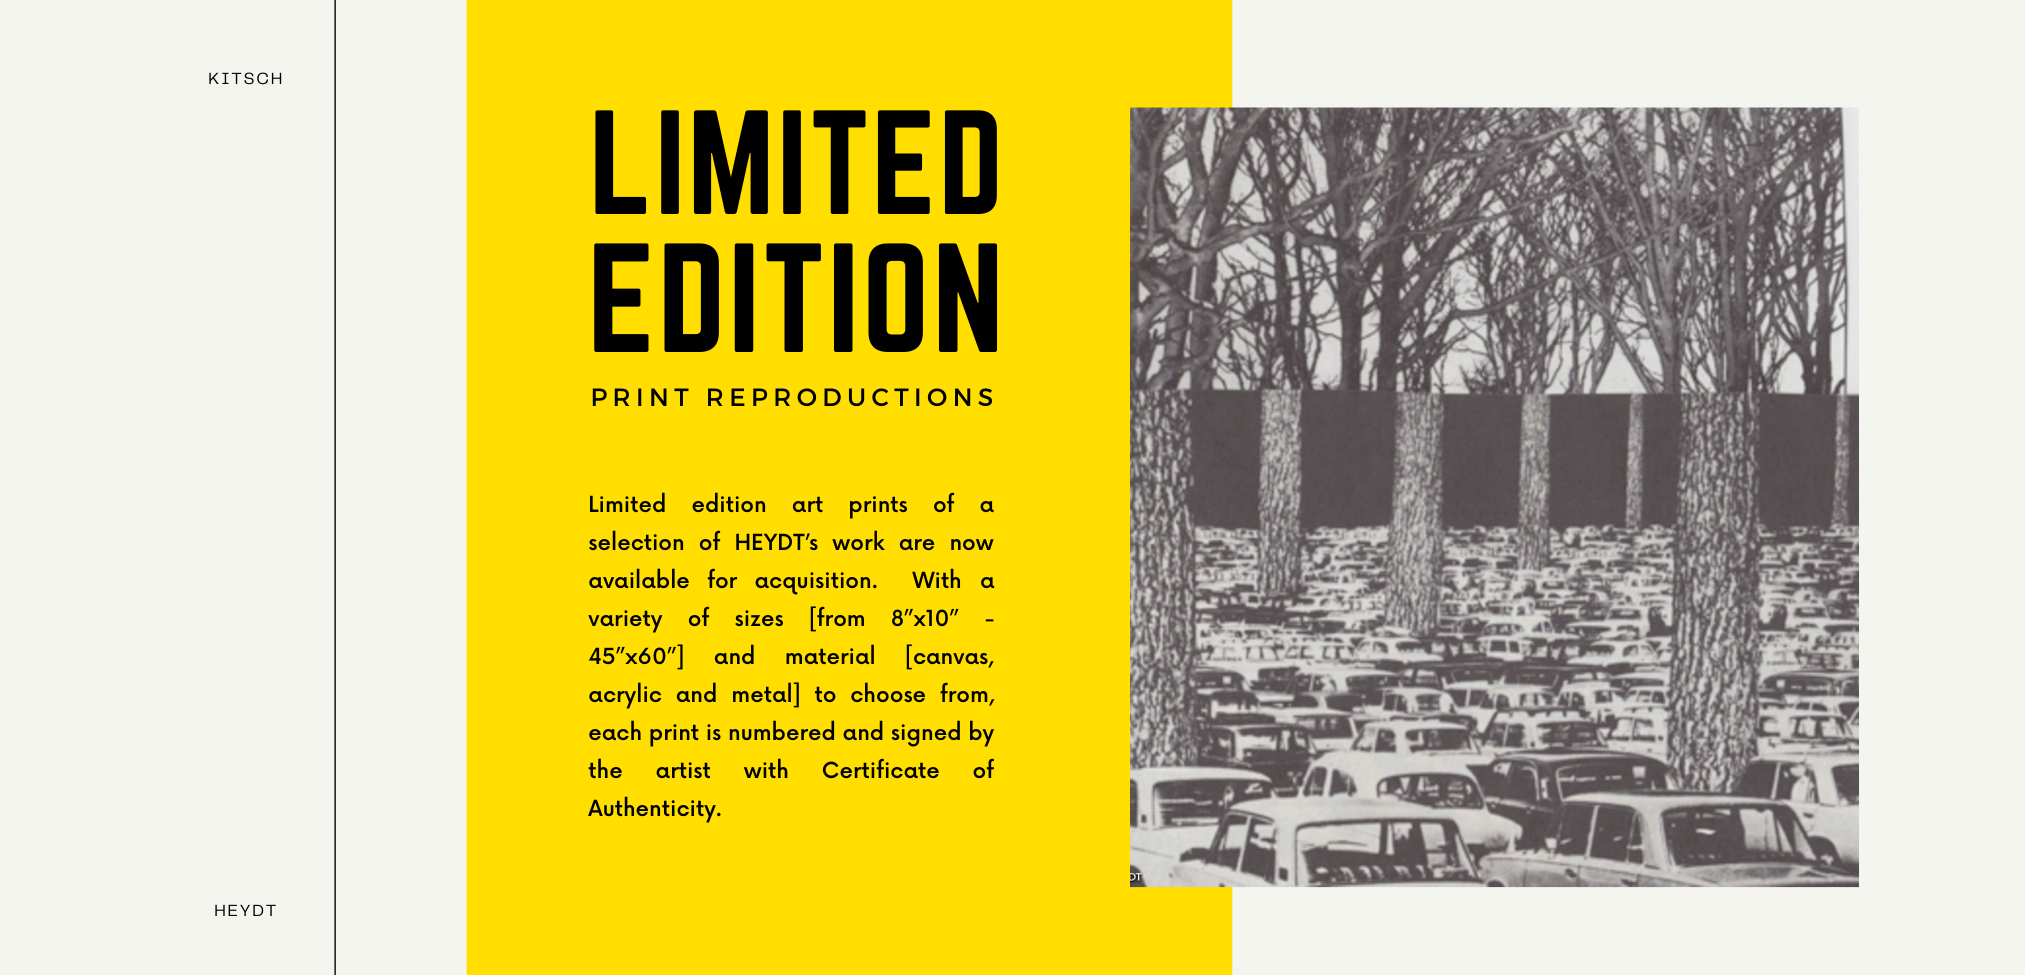 limited edition prints-KITSCH-HEYDT46.png